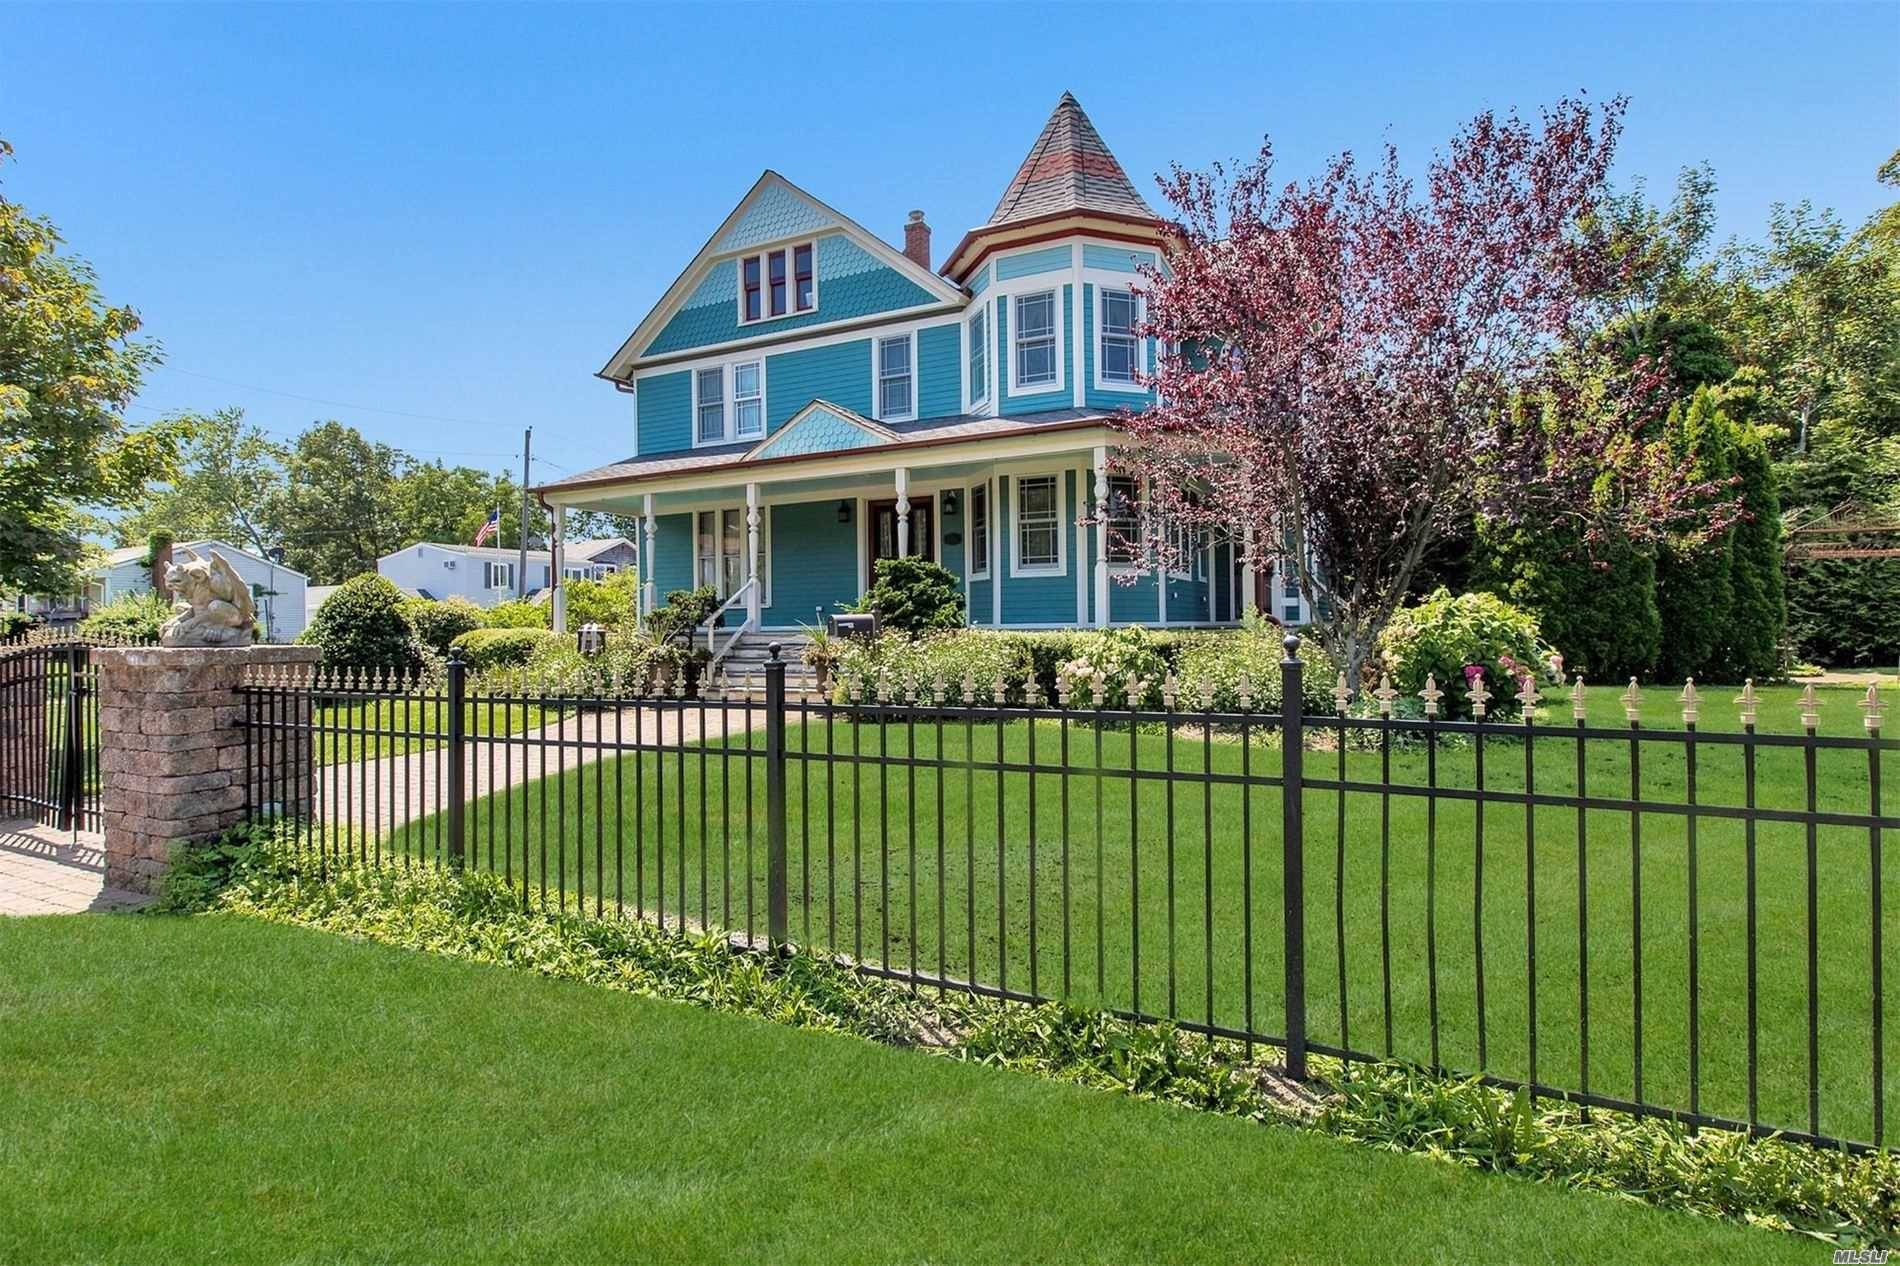 Classically Restored Circa 1890 Queen Anne Victorian, Chef Style Kitchen, Wide Plank Detailed Floors and Moldings, Large Dining Room Century Old French Stained Doors, Living Room w Fireplace, Pocket Door ...